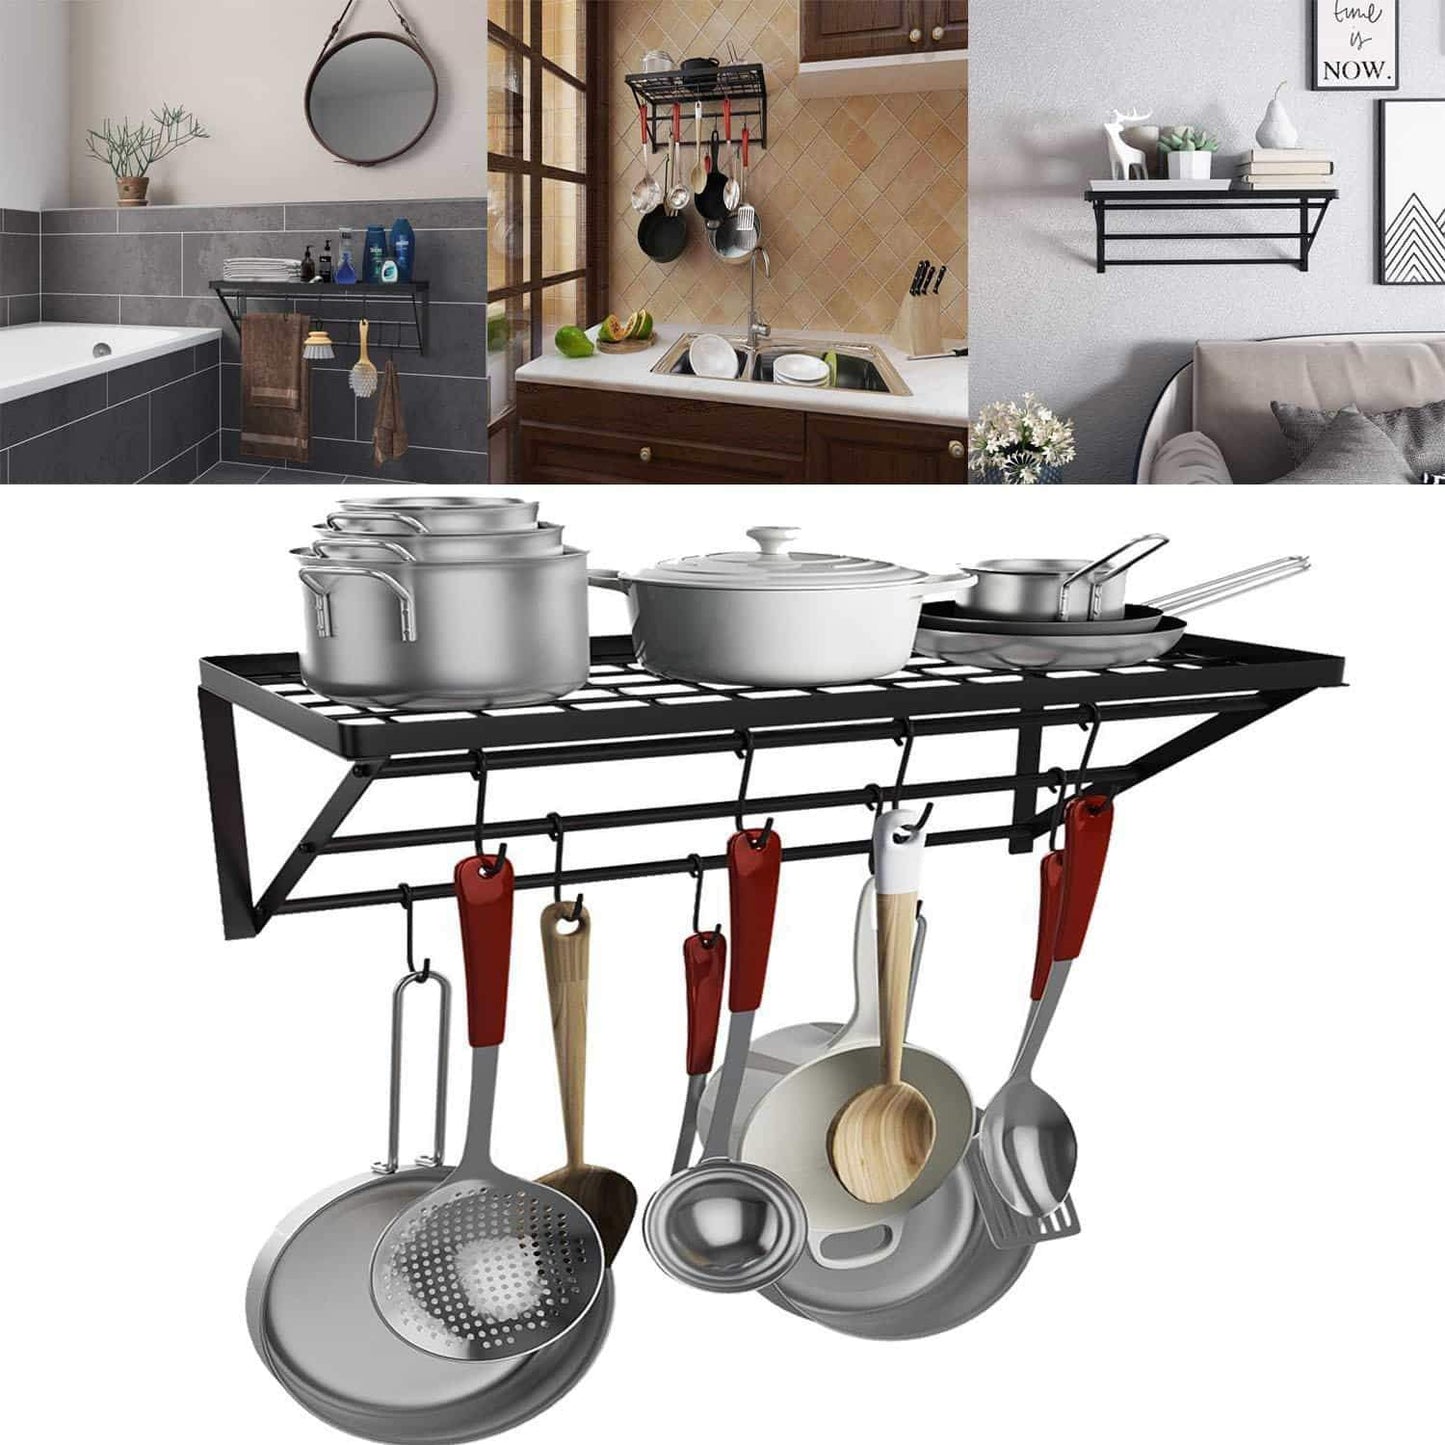 Great kaluo 3 tier hanging wall mount pot rack kitchen storage shelf with 10 hooks for kitchen cookware utensils pans household items